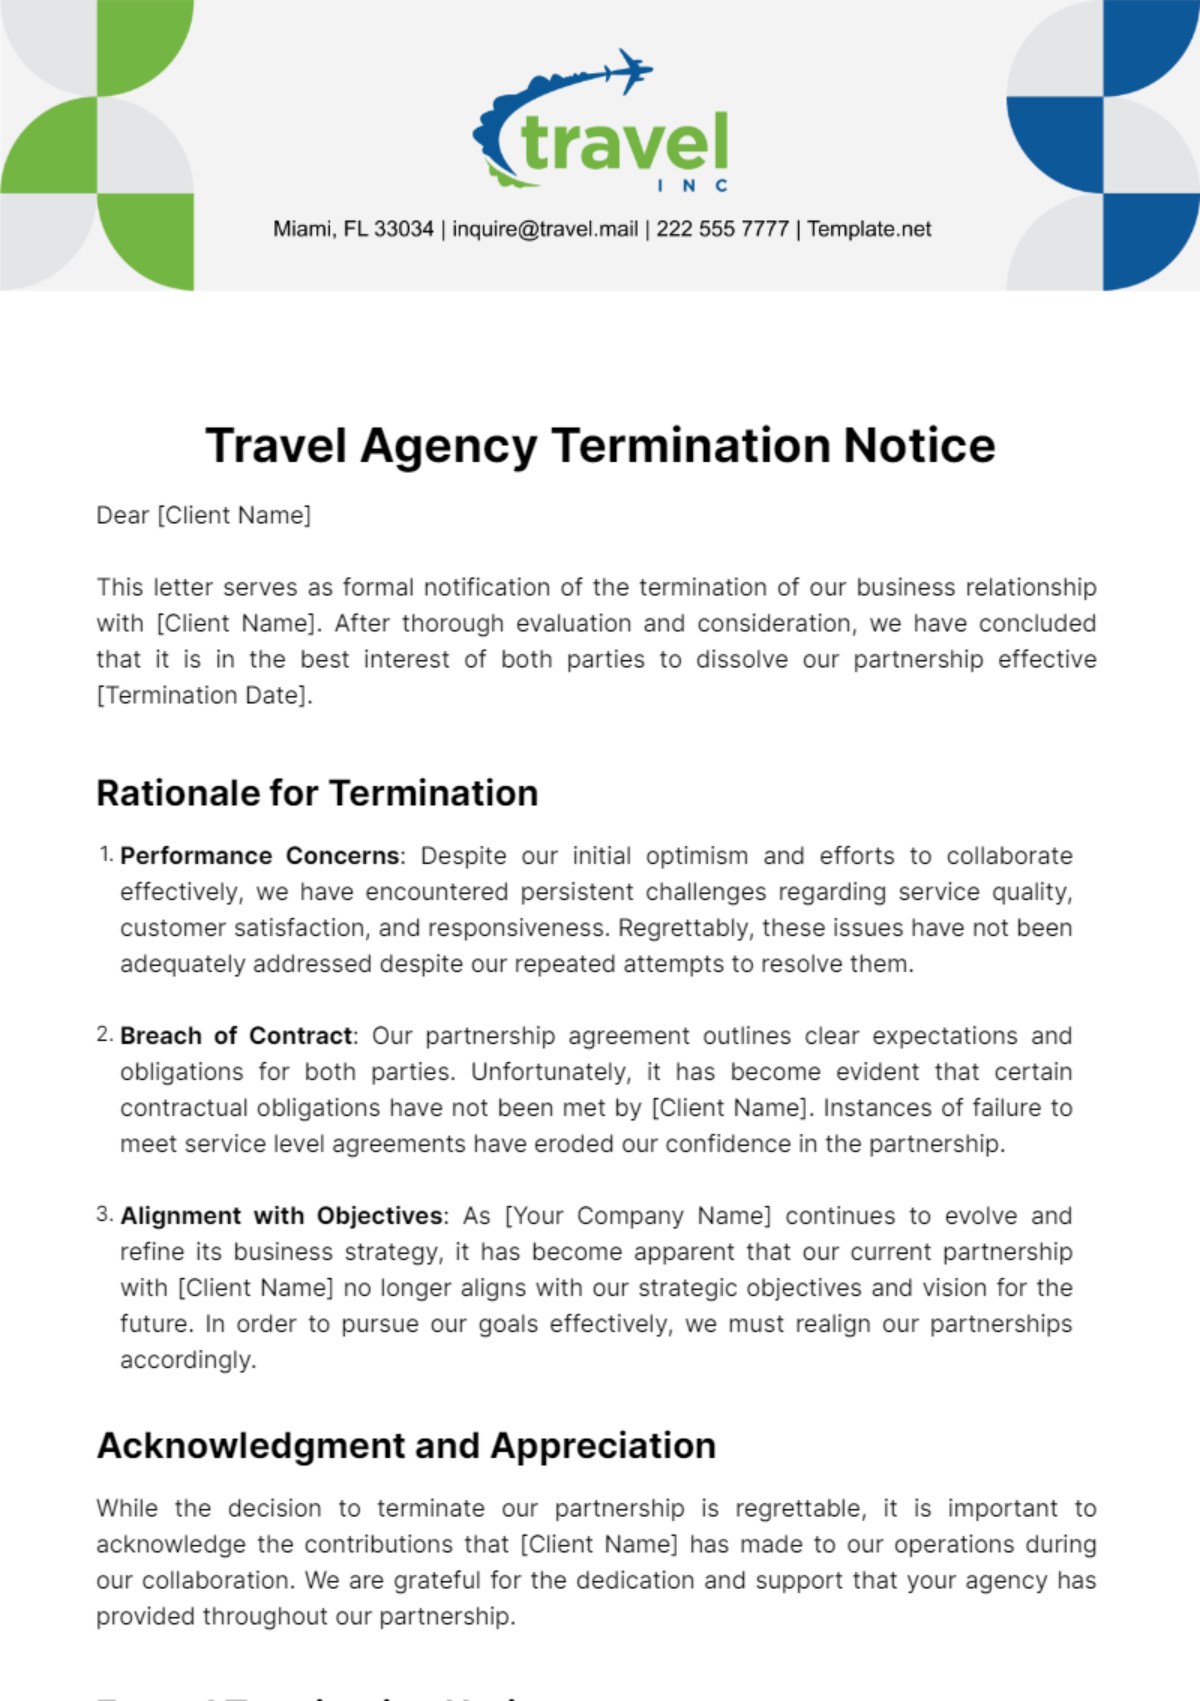 Travel Agency Termination Notice Template